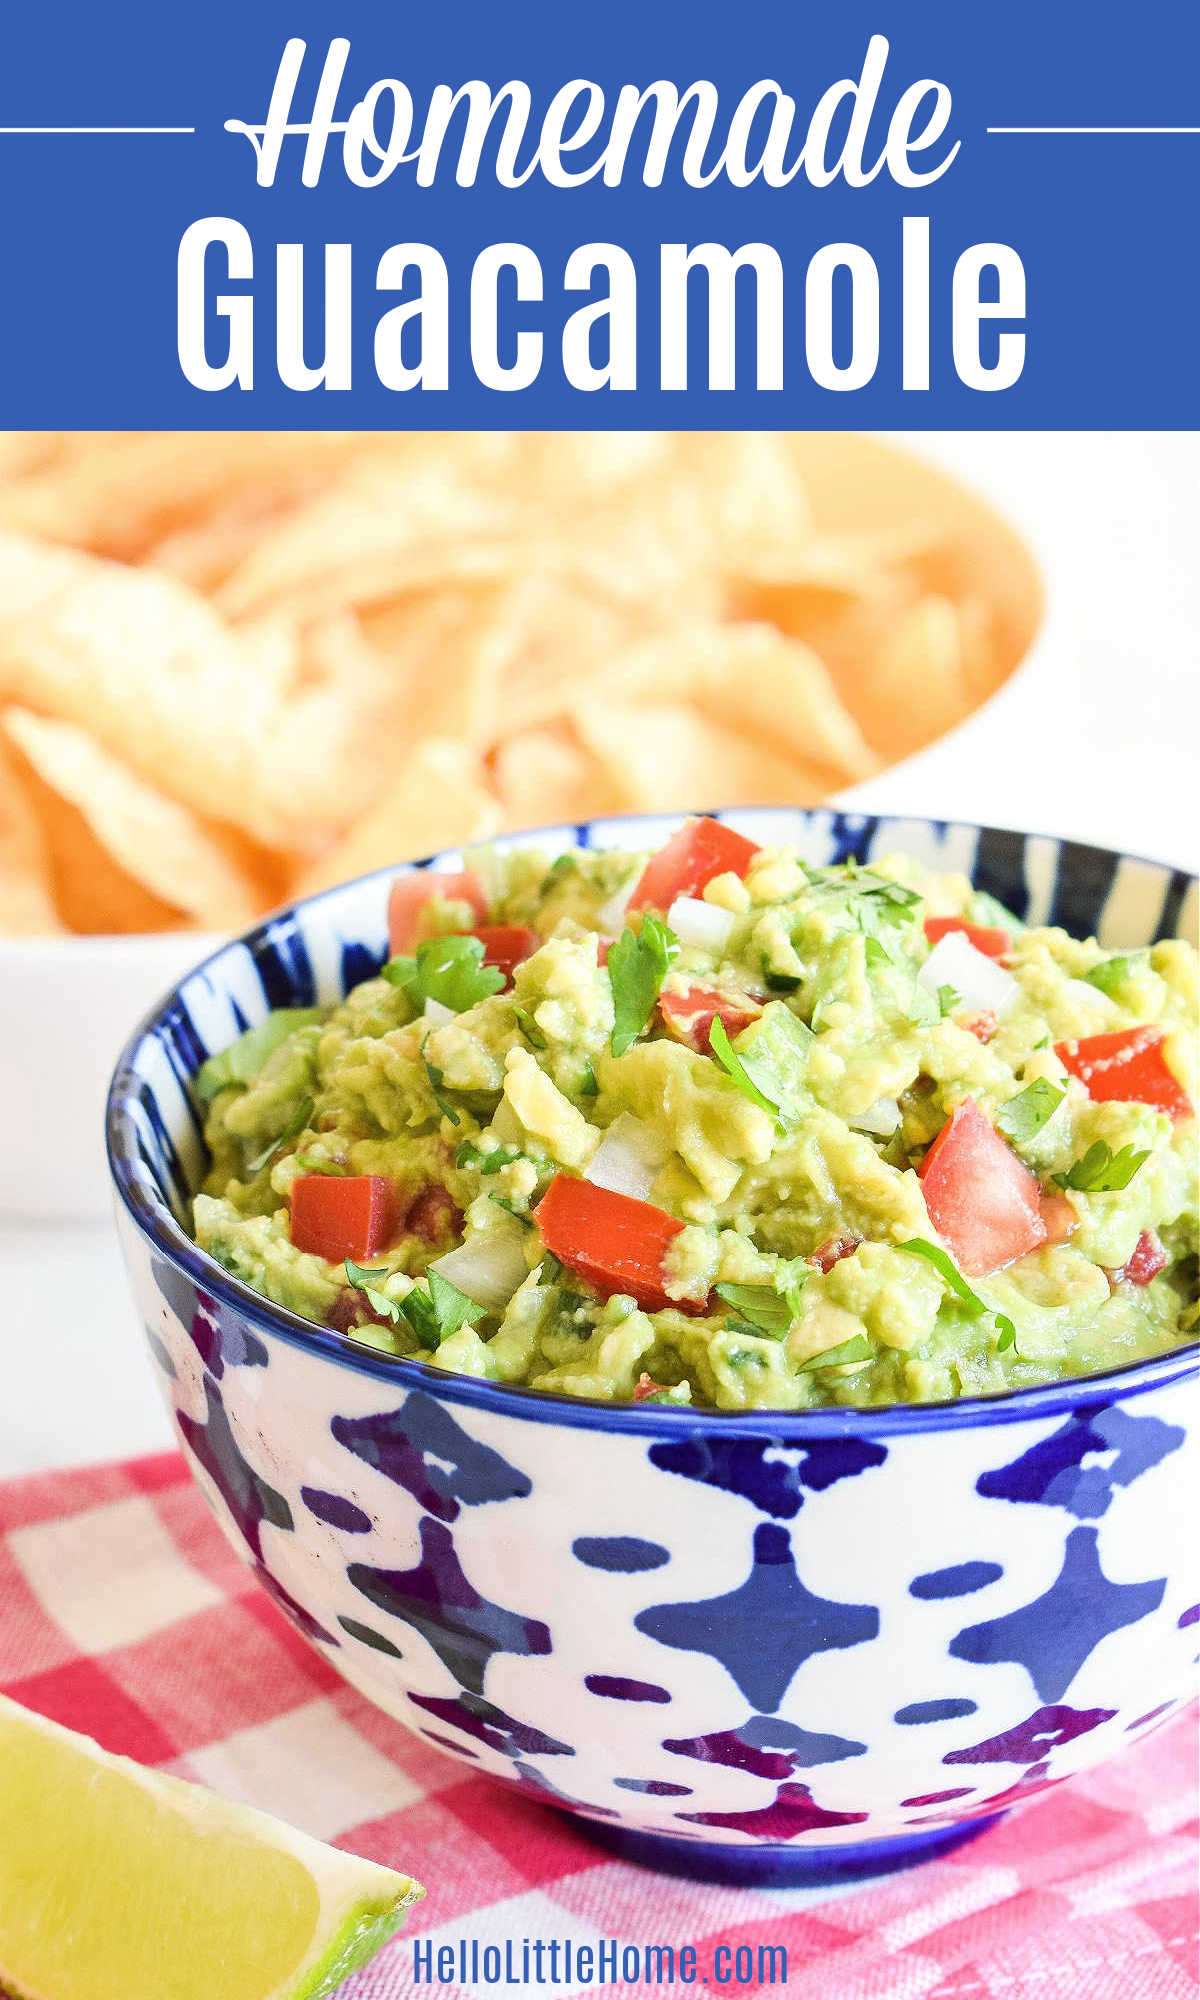 A bowl of homemade guacamole on a napkin with tortilla chips behind it.